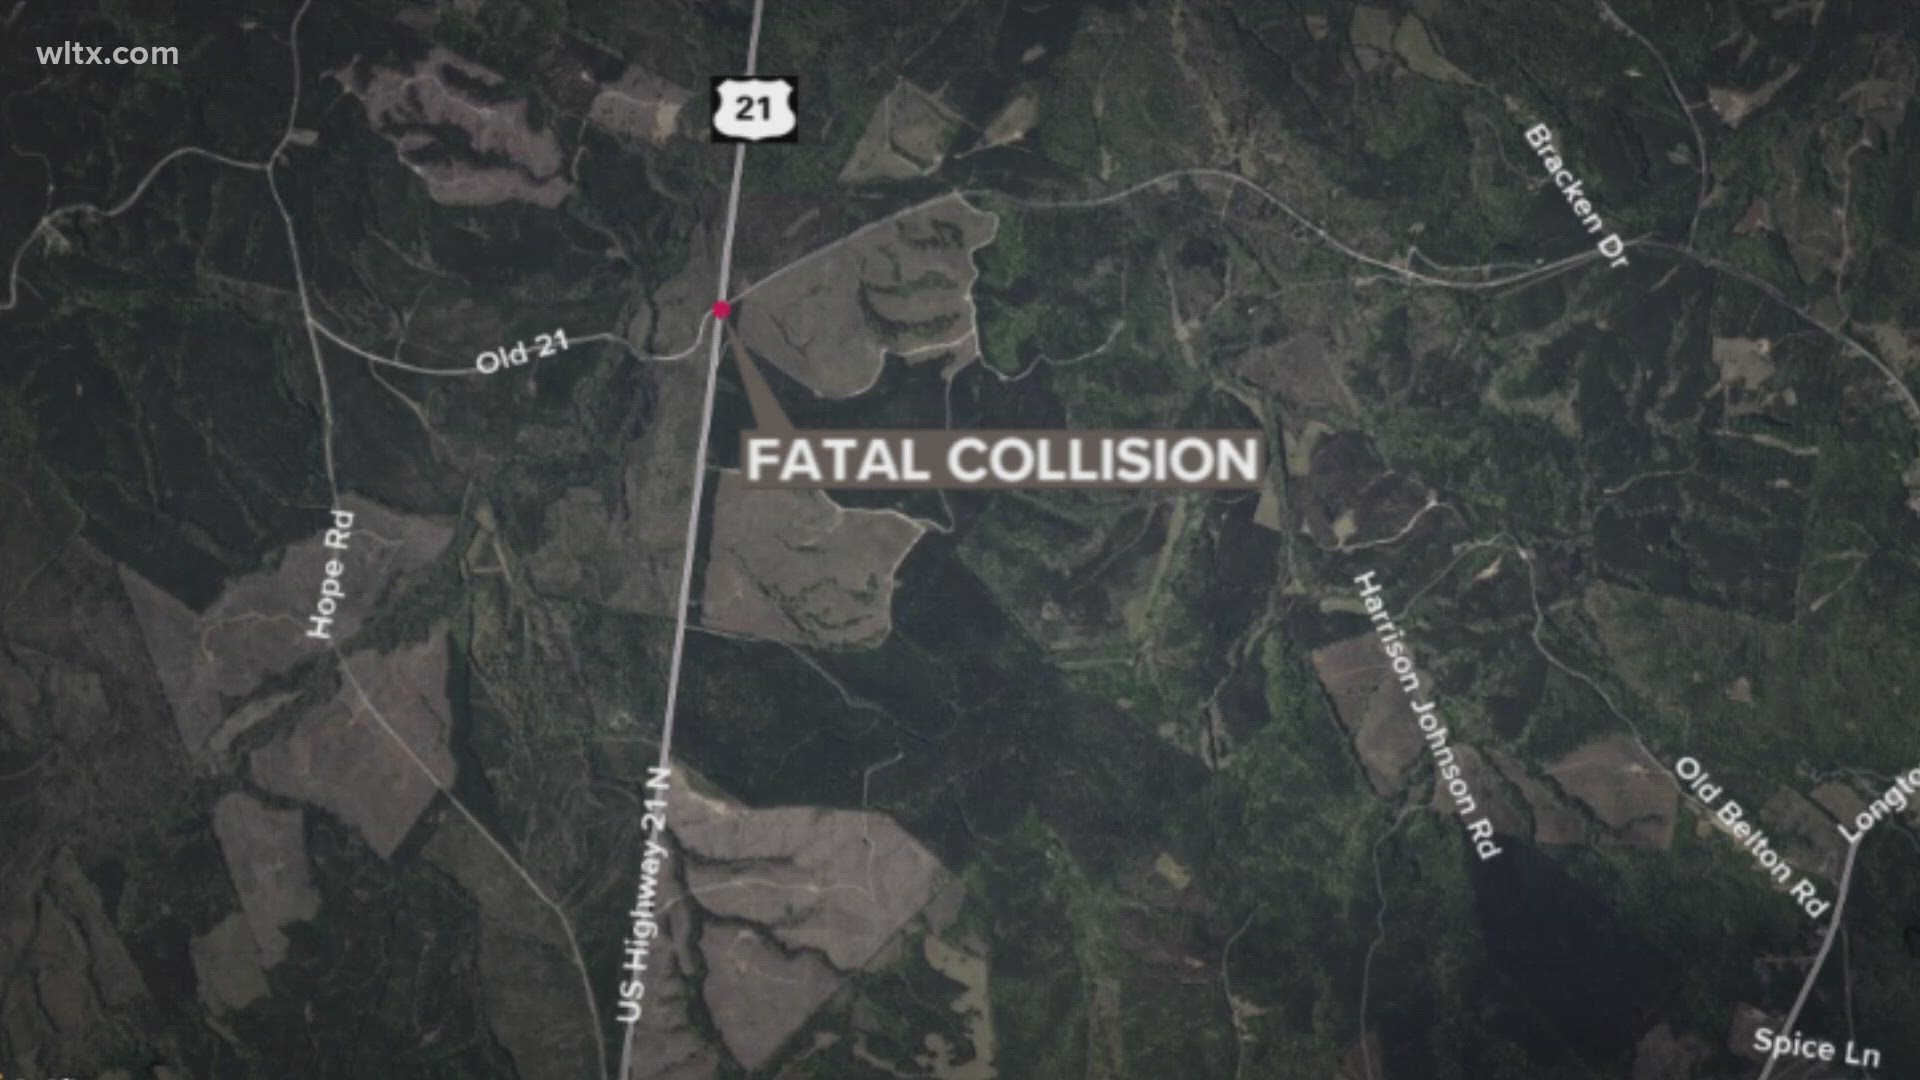 SC Highway Patrol says one person is dead after an evening accident on HWY 21.